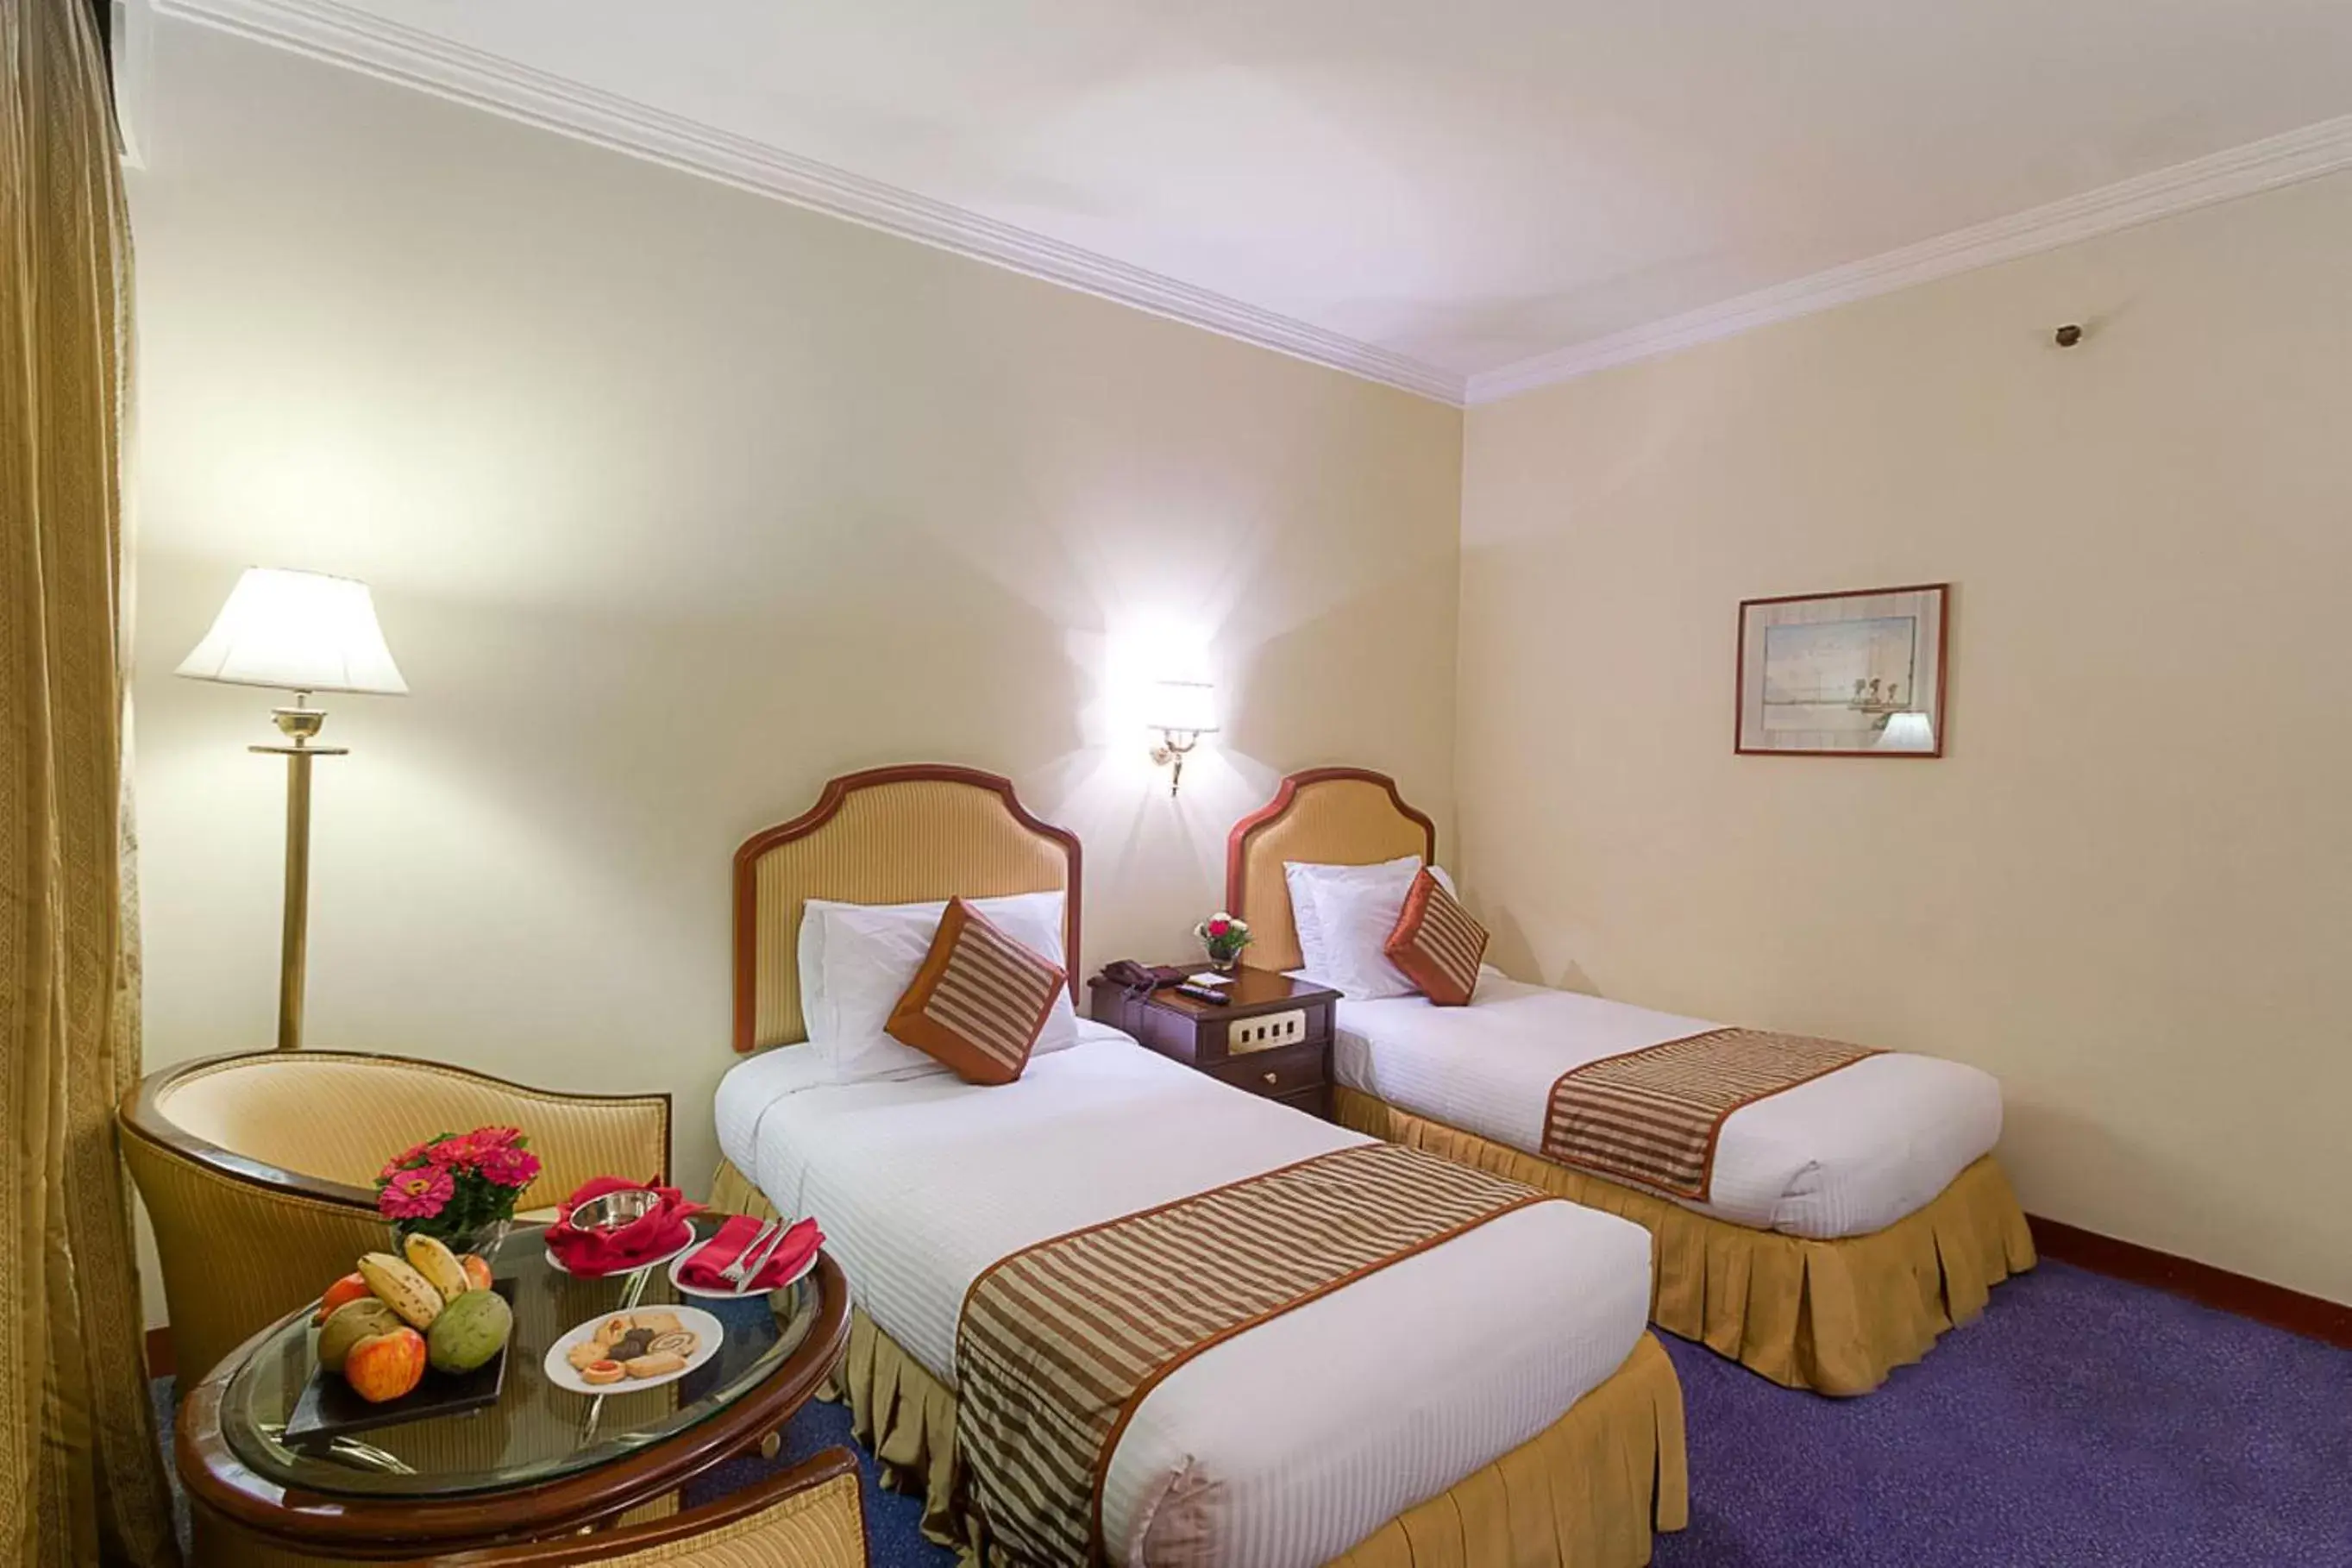 Deluxe Twin Room - single occupancy - 20% Discount on Buffet at Restaurant & 15% Discount at BAR in The Everest Hotel